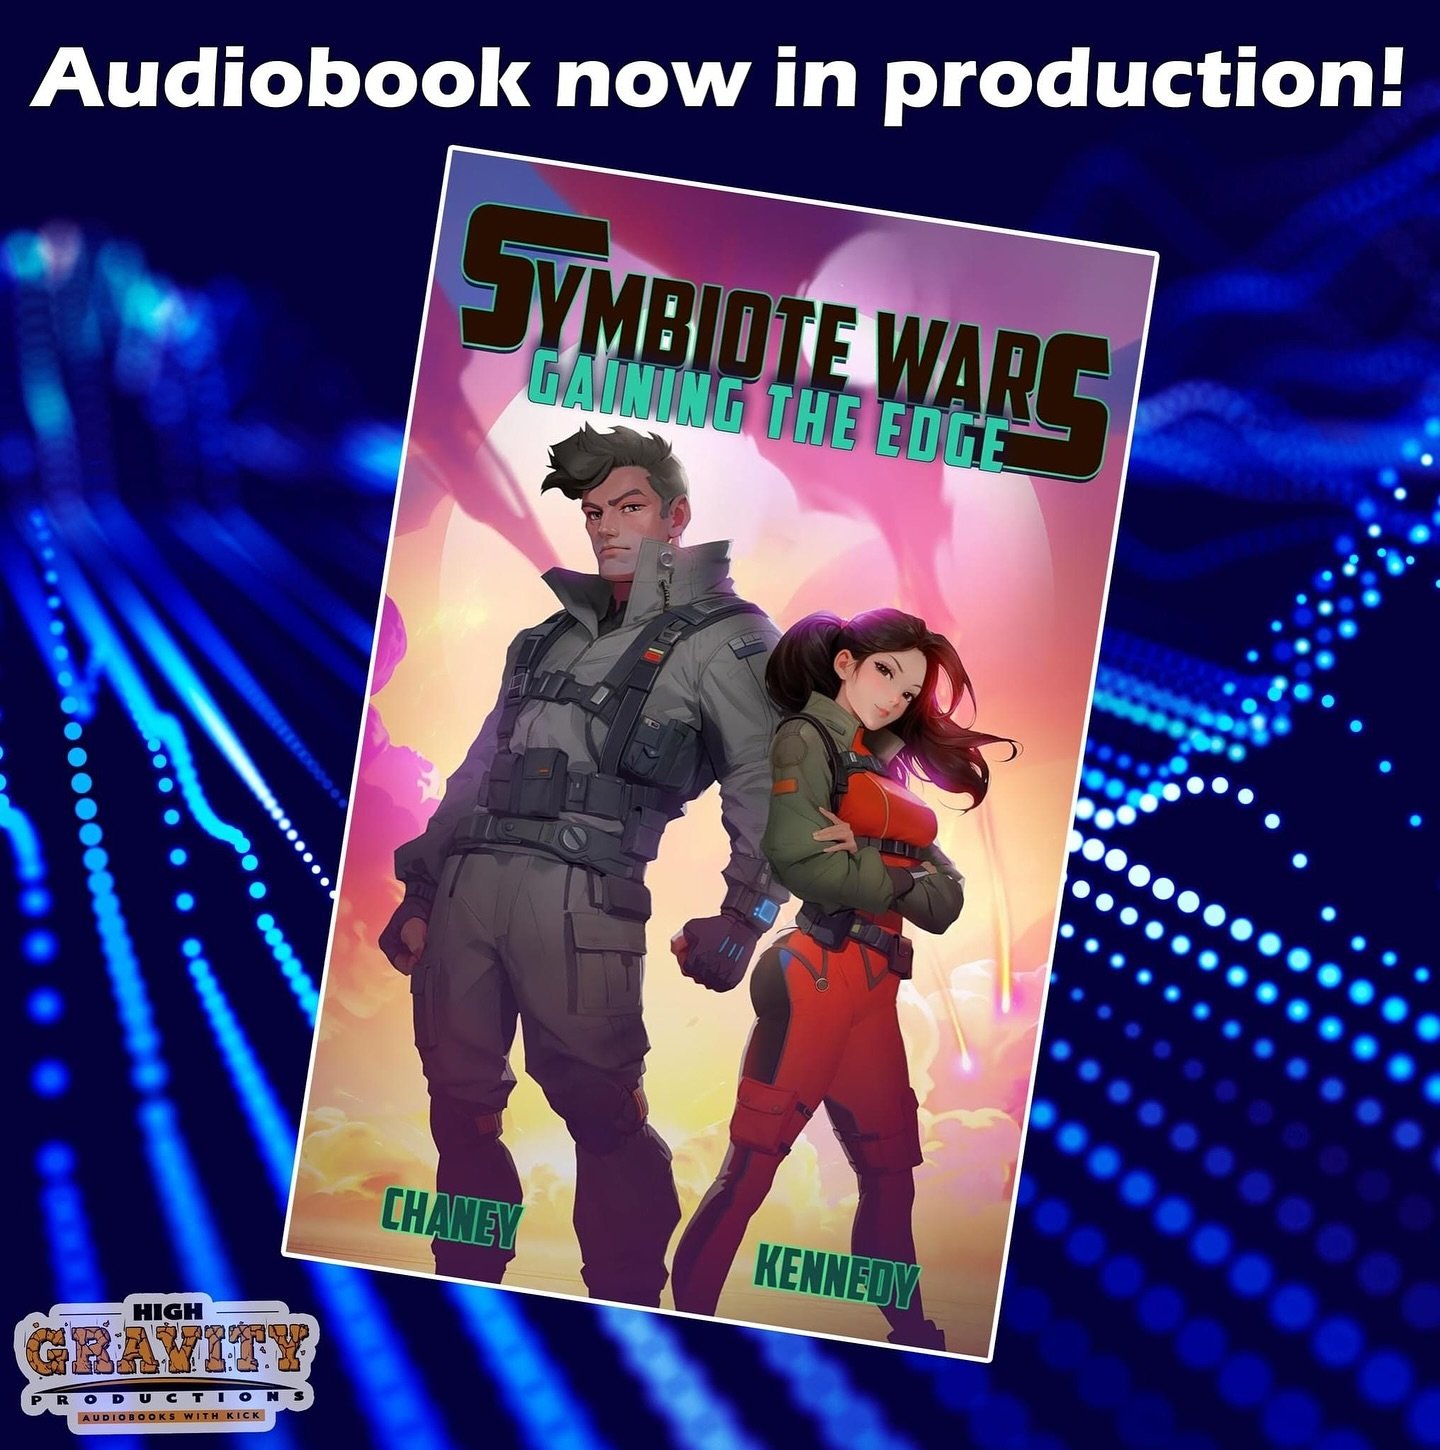 Gaining the Edge, Symbiote Wars Book 3 is now in production! An amazing science fiction saga, written by the fascinating minds of @jn_chaney and @chriskennedypublishing, being performed by @jeffreykafer_audiobooks. ⚡️🎙